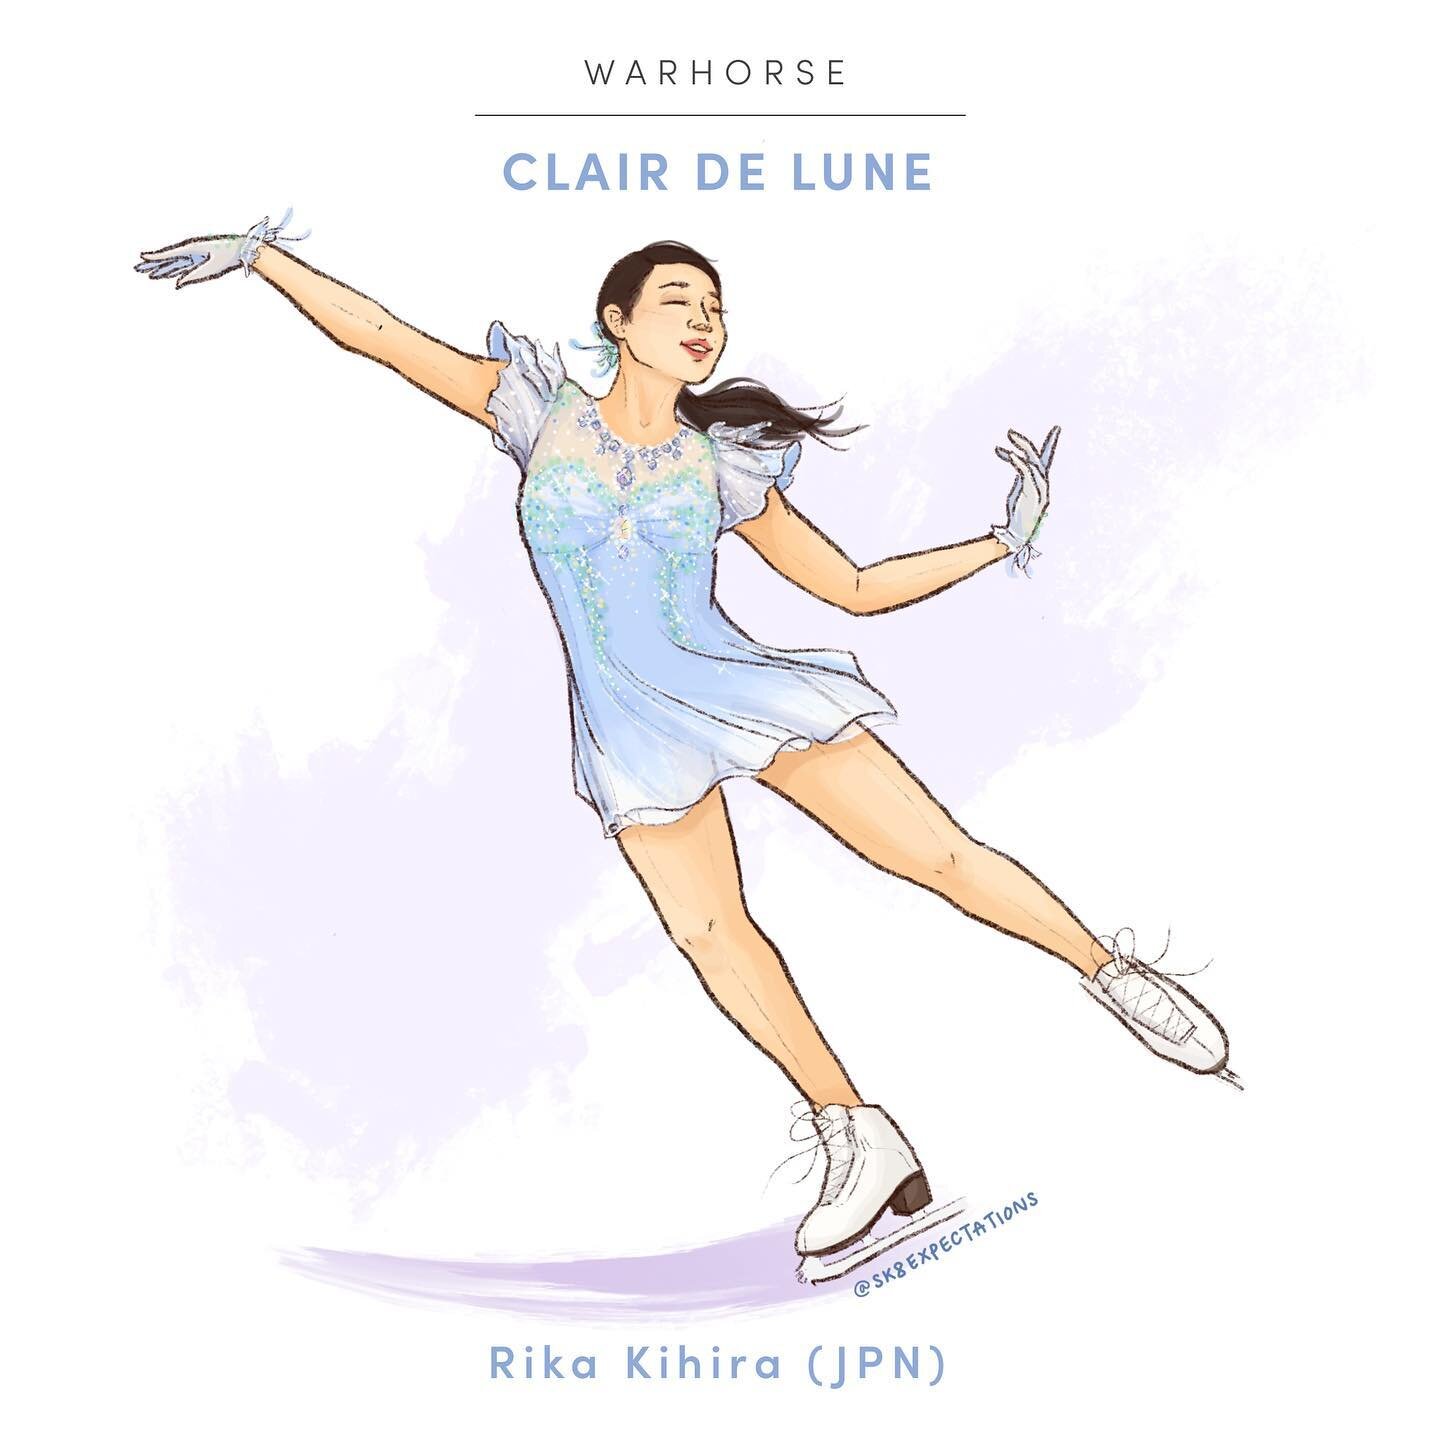 WARHORSE: &ldquo;Clair de Lune&rdquo; (Claude Debussy)
-
Rika Kihira 🇯🇵
-
2019 ISU World Team Trophy, Short Program
-
Choreographed by David Wilson 
-
Rika&rsquo;s senior debut with this amazing SP was such a genius move - she completely embodies t